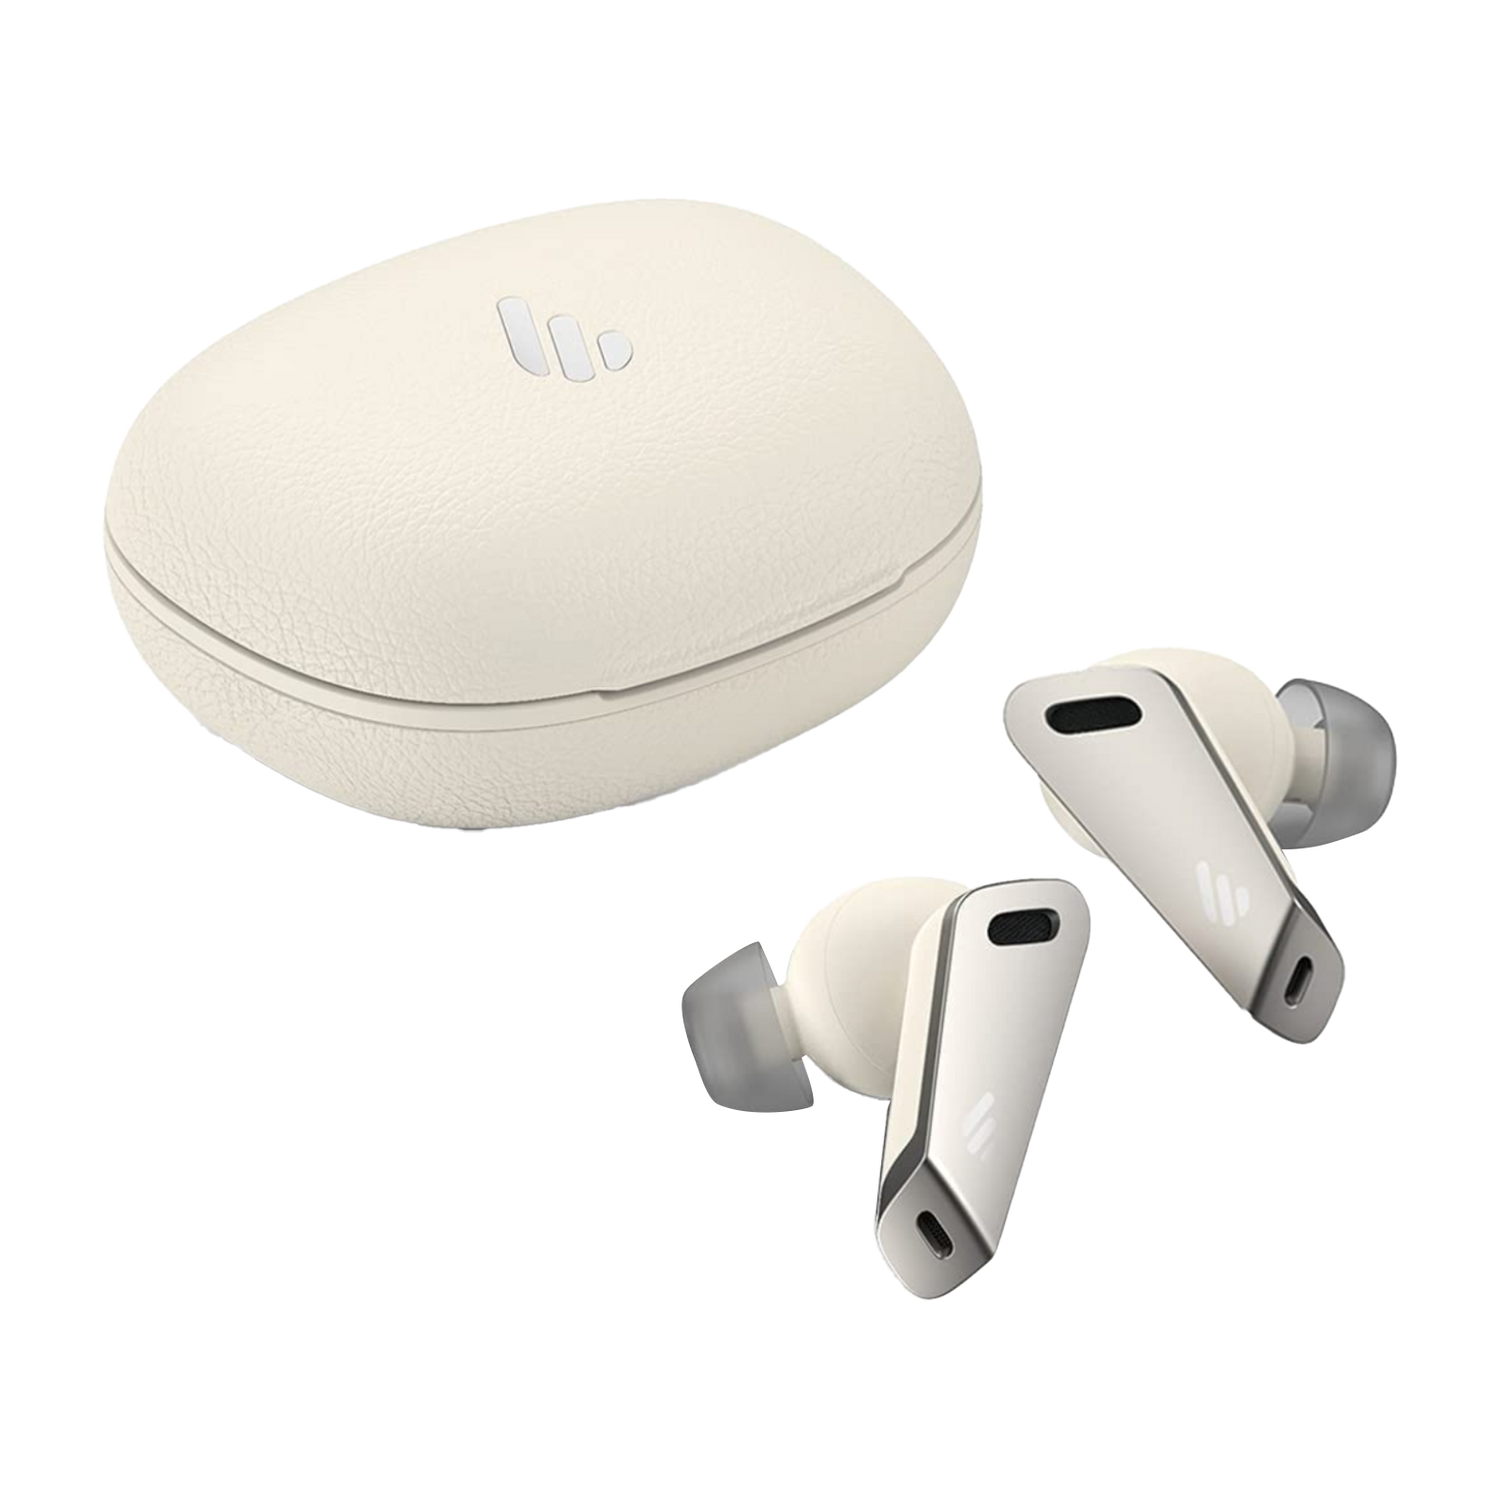 TWS NB2 Pro True Wireless Earbuds with Active Noise Cancellation